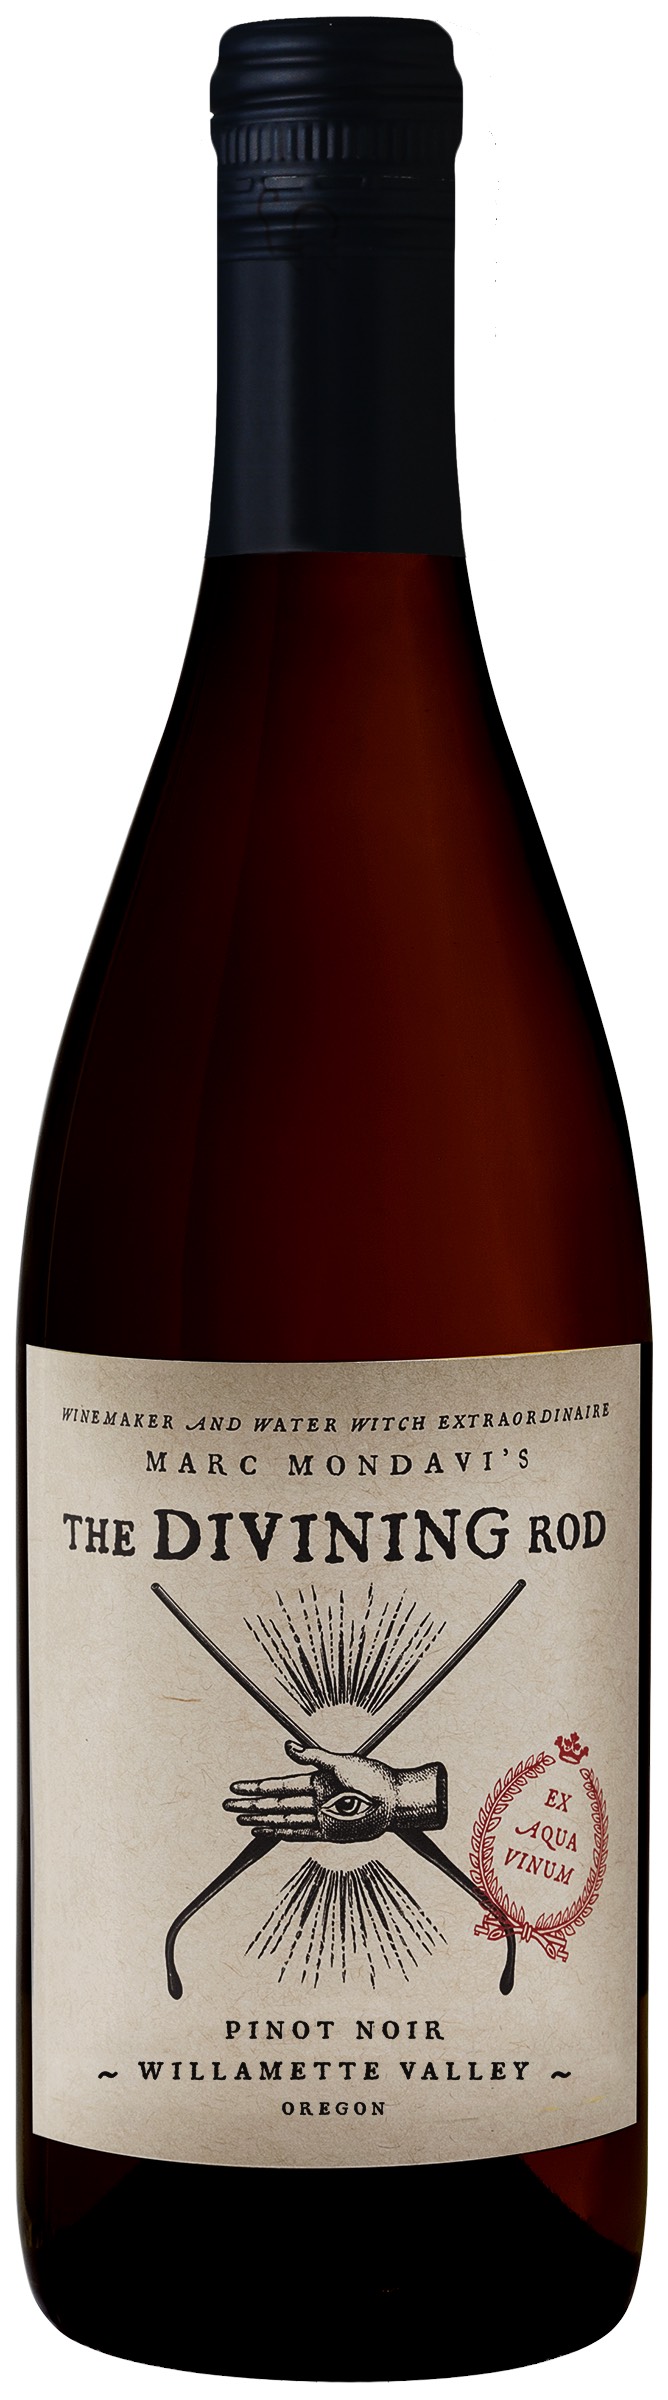 The new 2014 Divining Rod Pinot Noir from Willamette Valley, Oregon.